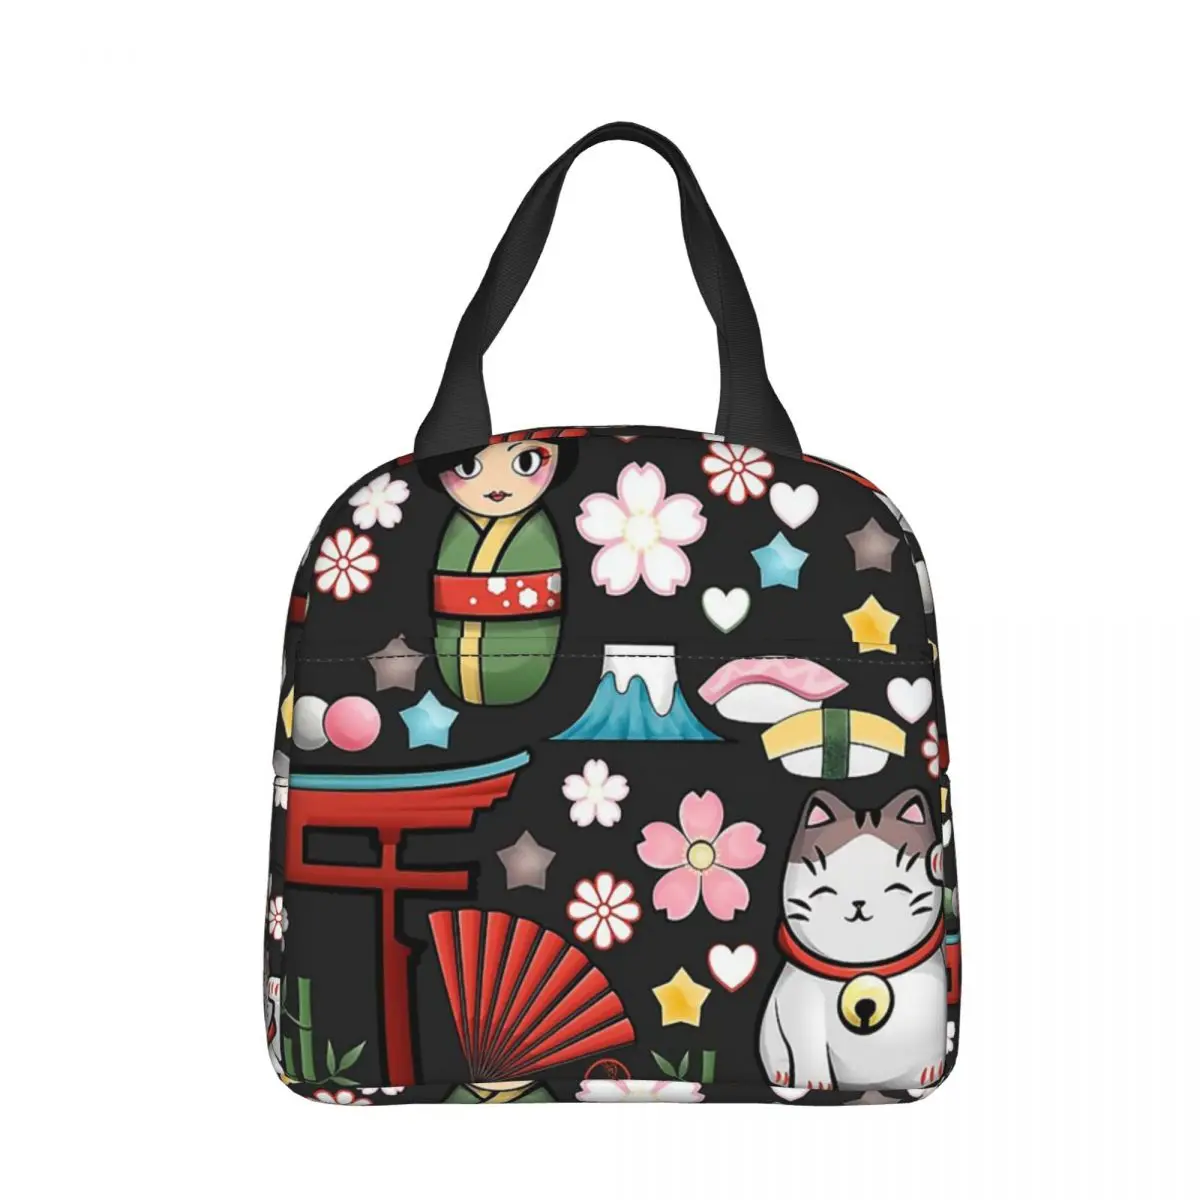 

Maneki Neko Lucky Cat Insulated Lunch Bags Cooler Bag Lunch Container Kokeshi Japanese Doll Tote Lunch Box Food Bag College